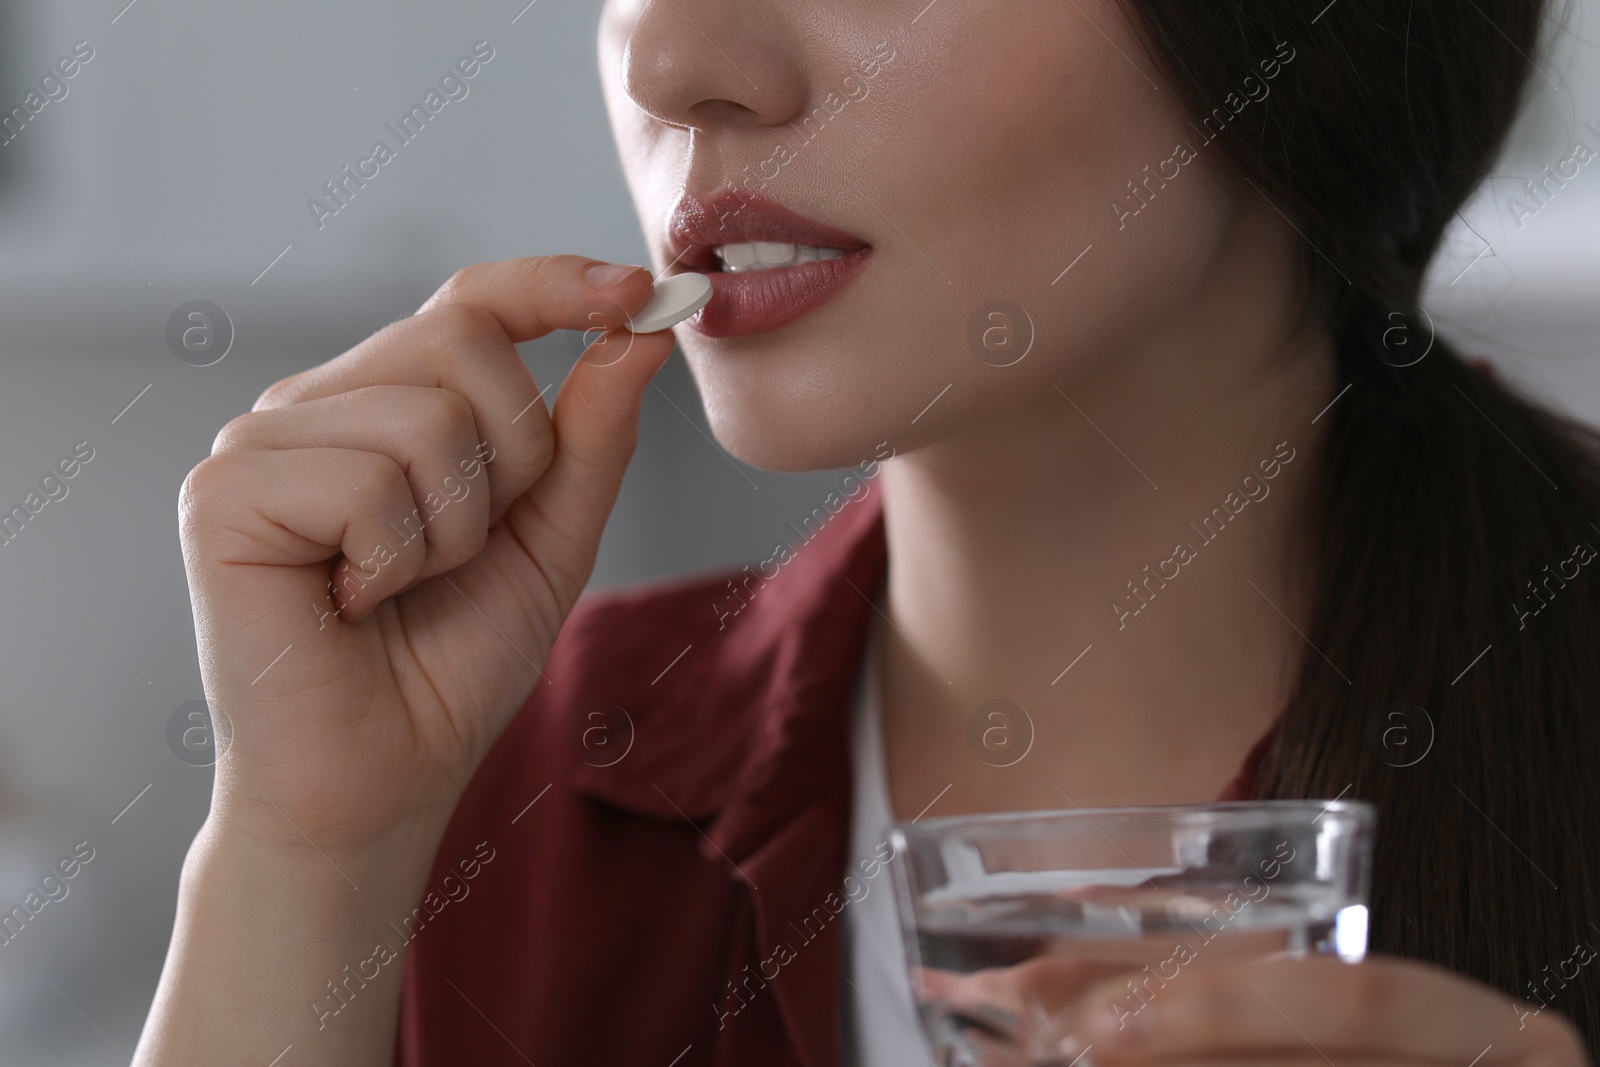 Photo of Woman with glass of water taking antidepressant pill on blurred background, closeup